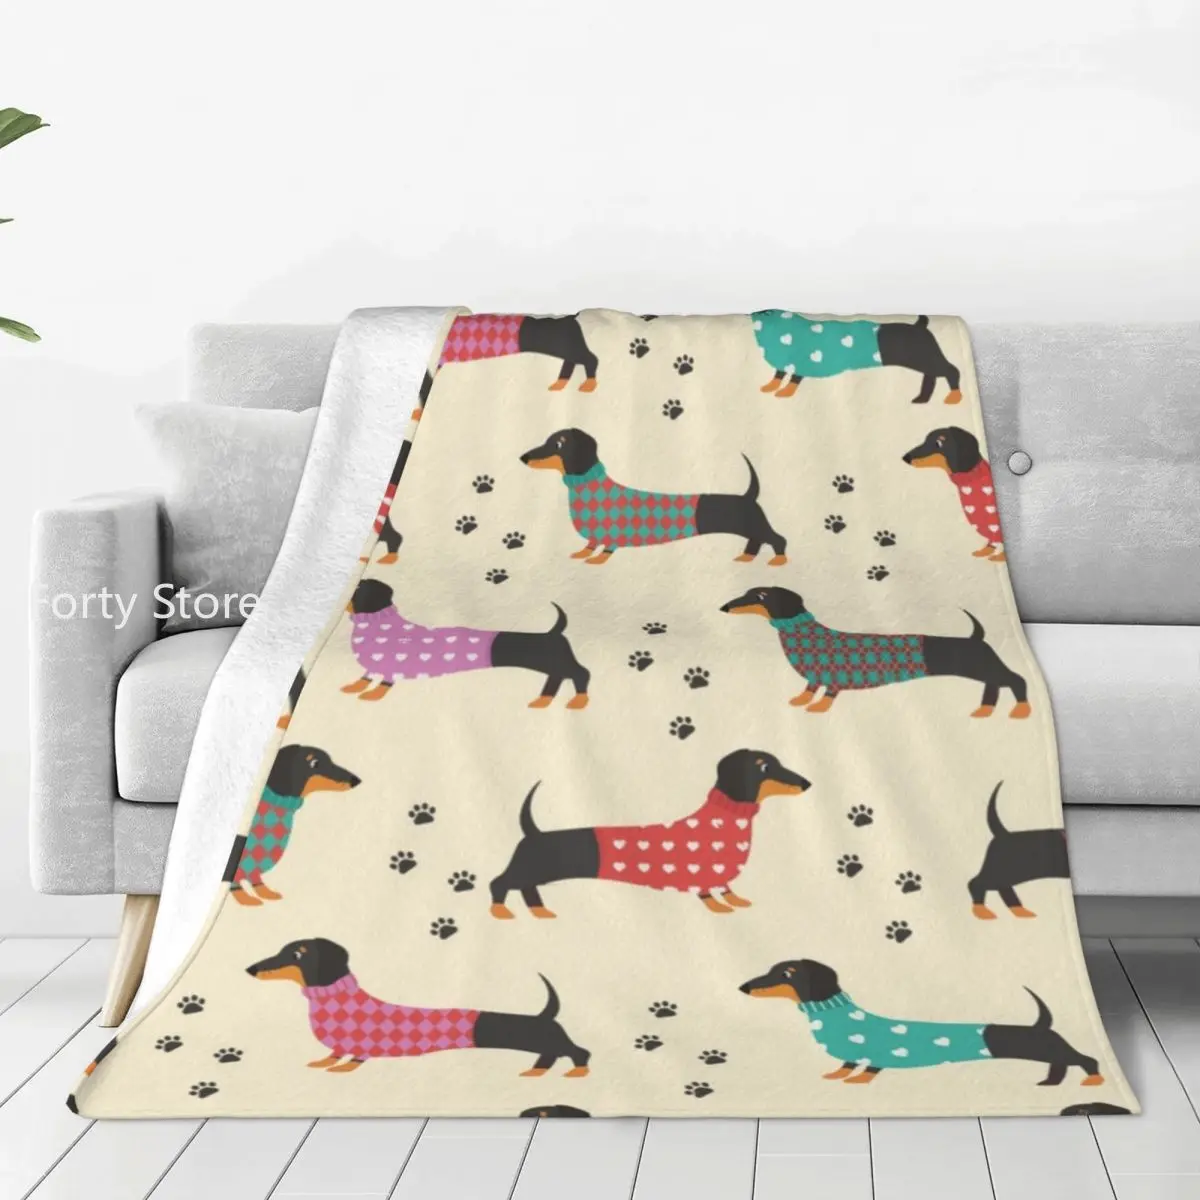 

Dachshund Dog Super Soft Blanket Lovely Animal Camping Bedding Throws Winter Colorful Custom Flannel Bedspread Sofa Bed Cover